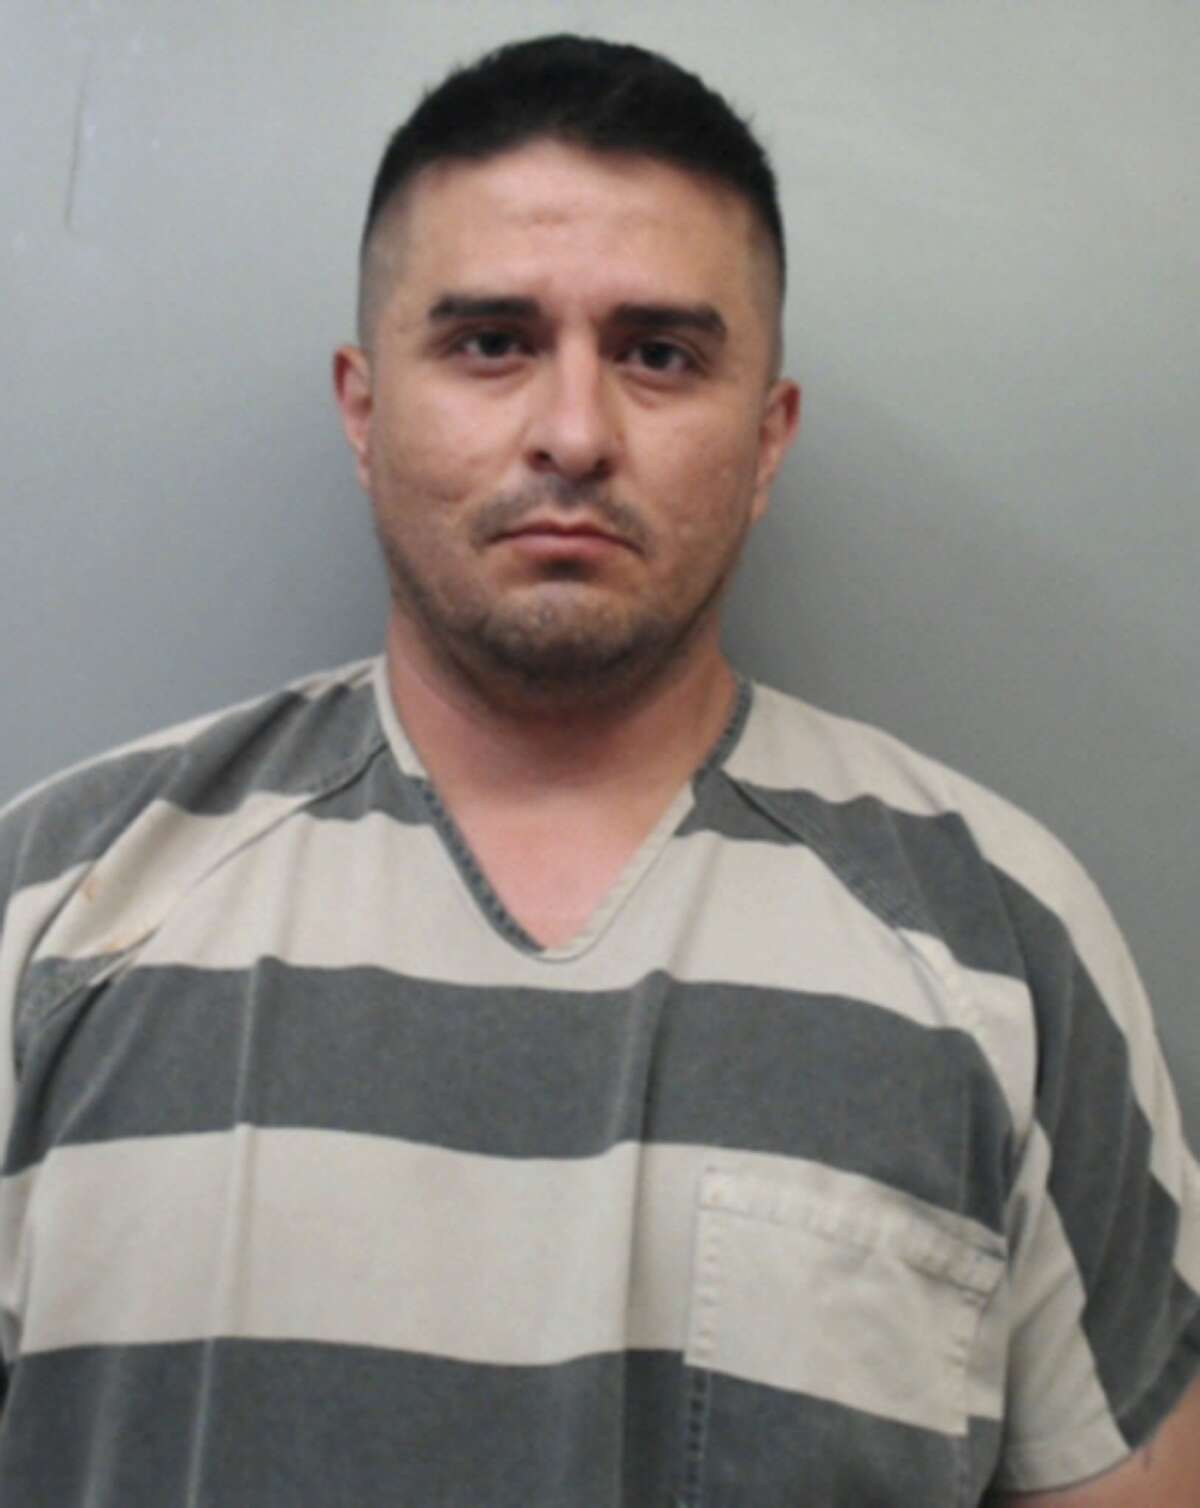 He was a seasoned Border Patrol agent Police said Ortiz was a 10-year veteran of the agency and worked as an intelligence supervisor. Court documents reveal that he was part of the Highway Interdiction Team, a group tasked with intercepting vehicles suspected of trafficking drugs and humans. 